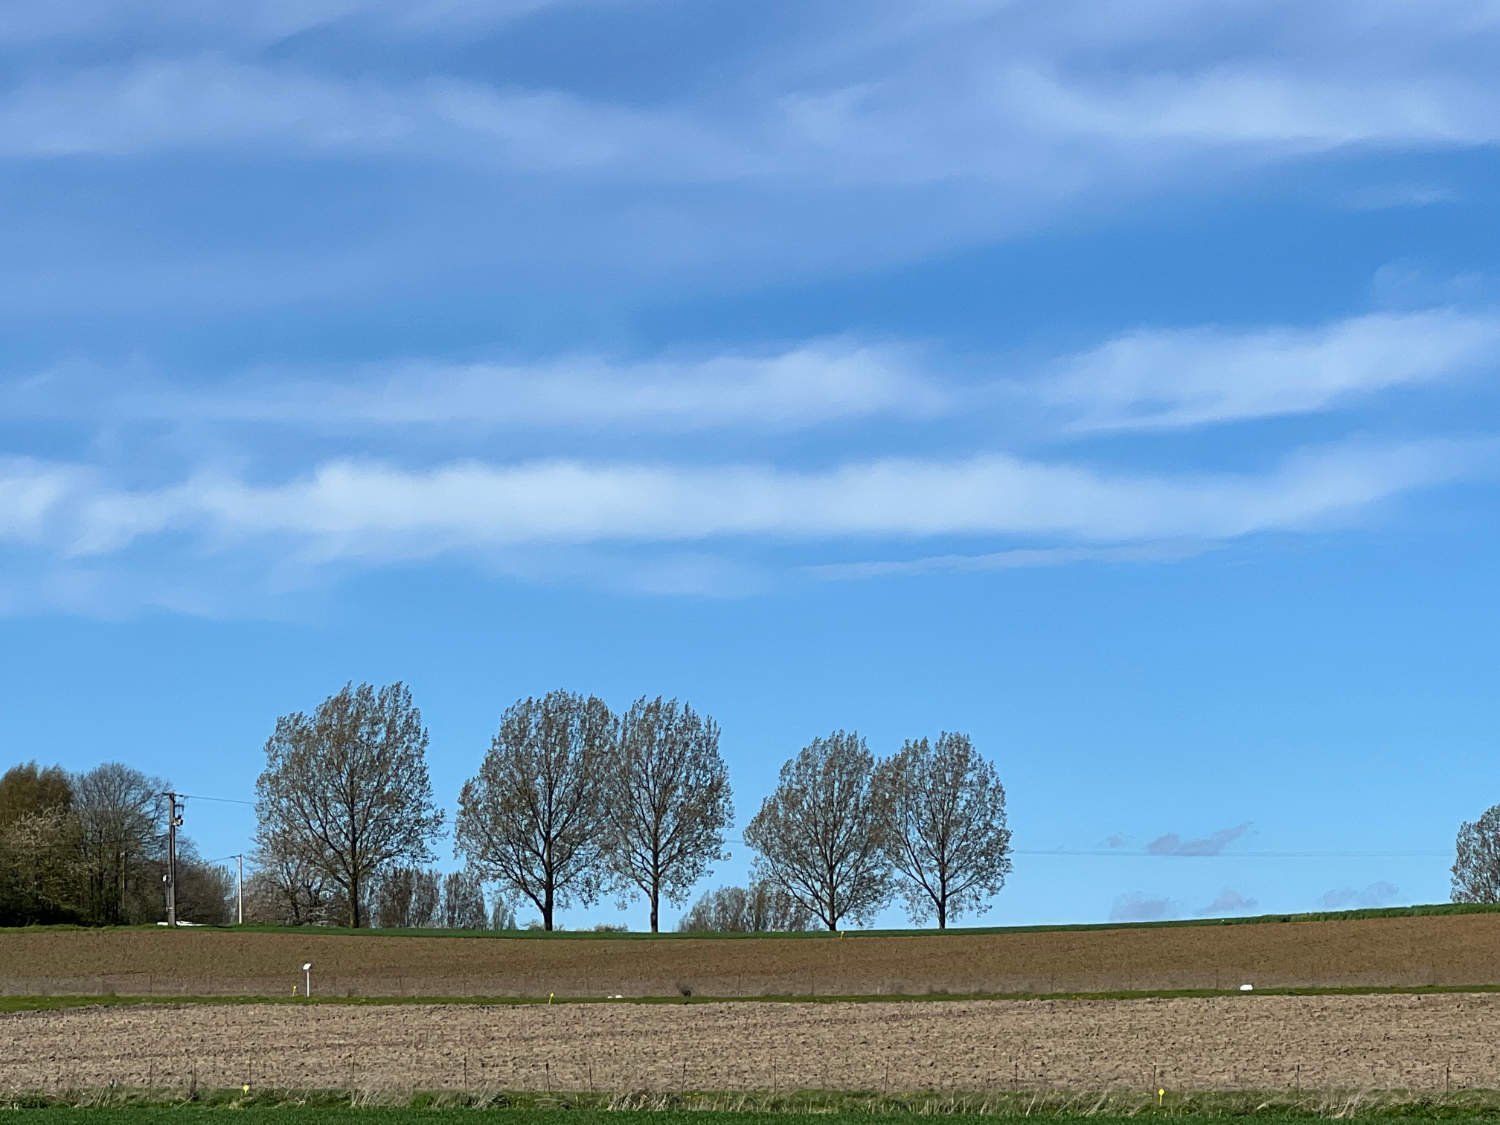 The fields of North-East France